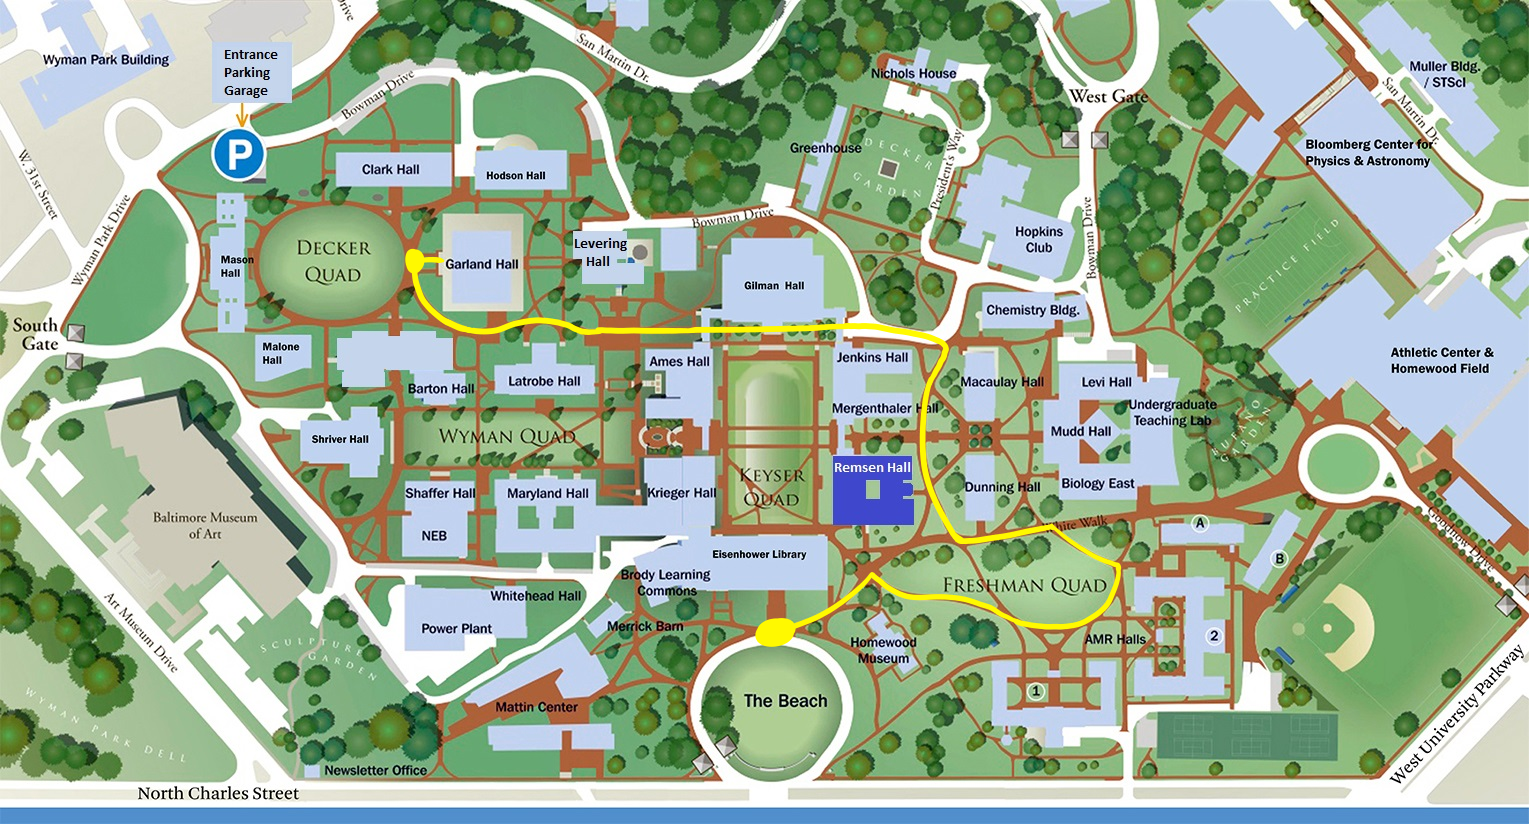 Map showing Johns Hopkins Homewood campus with the disability protest route highlighted in yello. The route starts at the Hopkins circle called The Beach, then turns right, goes around the Freshman Quad, then right again in front of Dunning and Macaulay Hall. The it turns left and goes behind Jenkins Hall, under Gilman Hall, and then to Garland Hall, where we present our demands to the President's office.